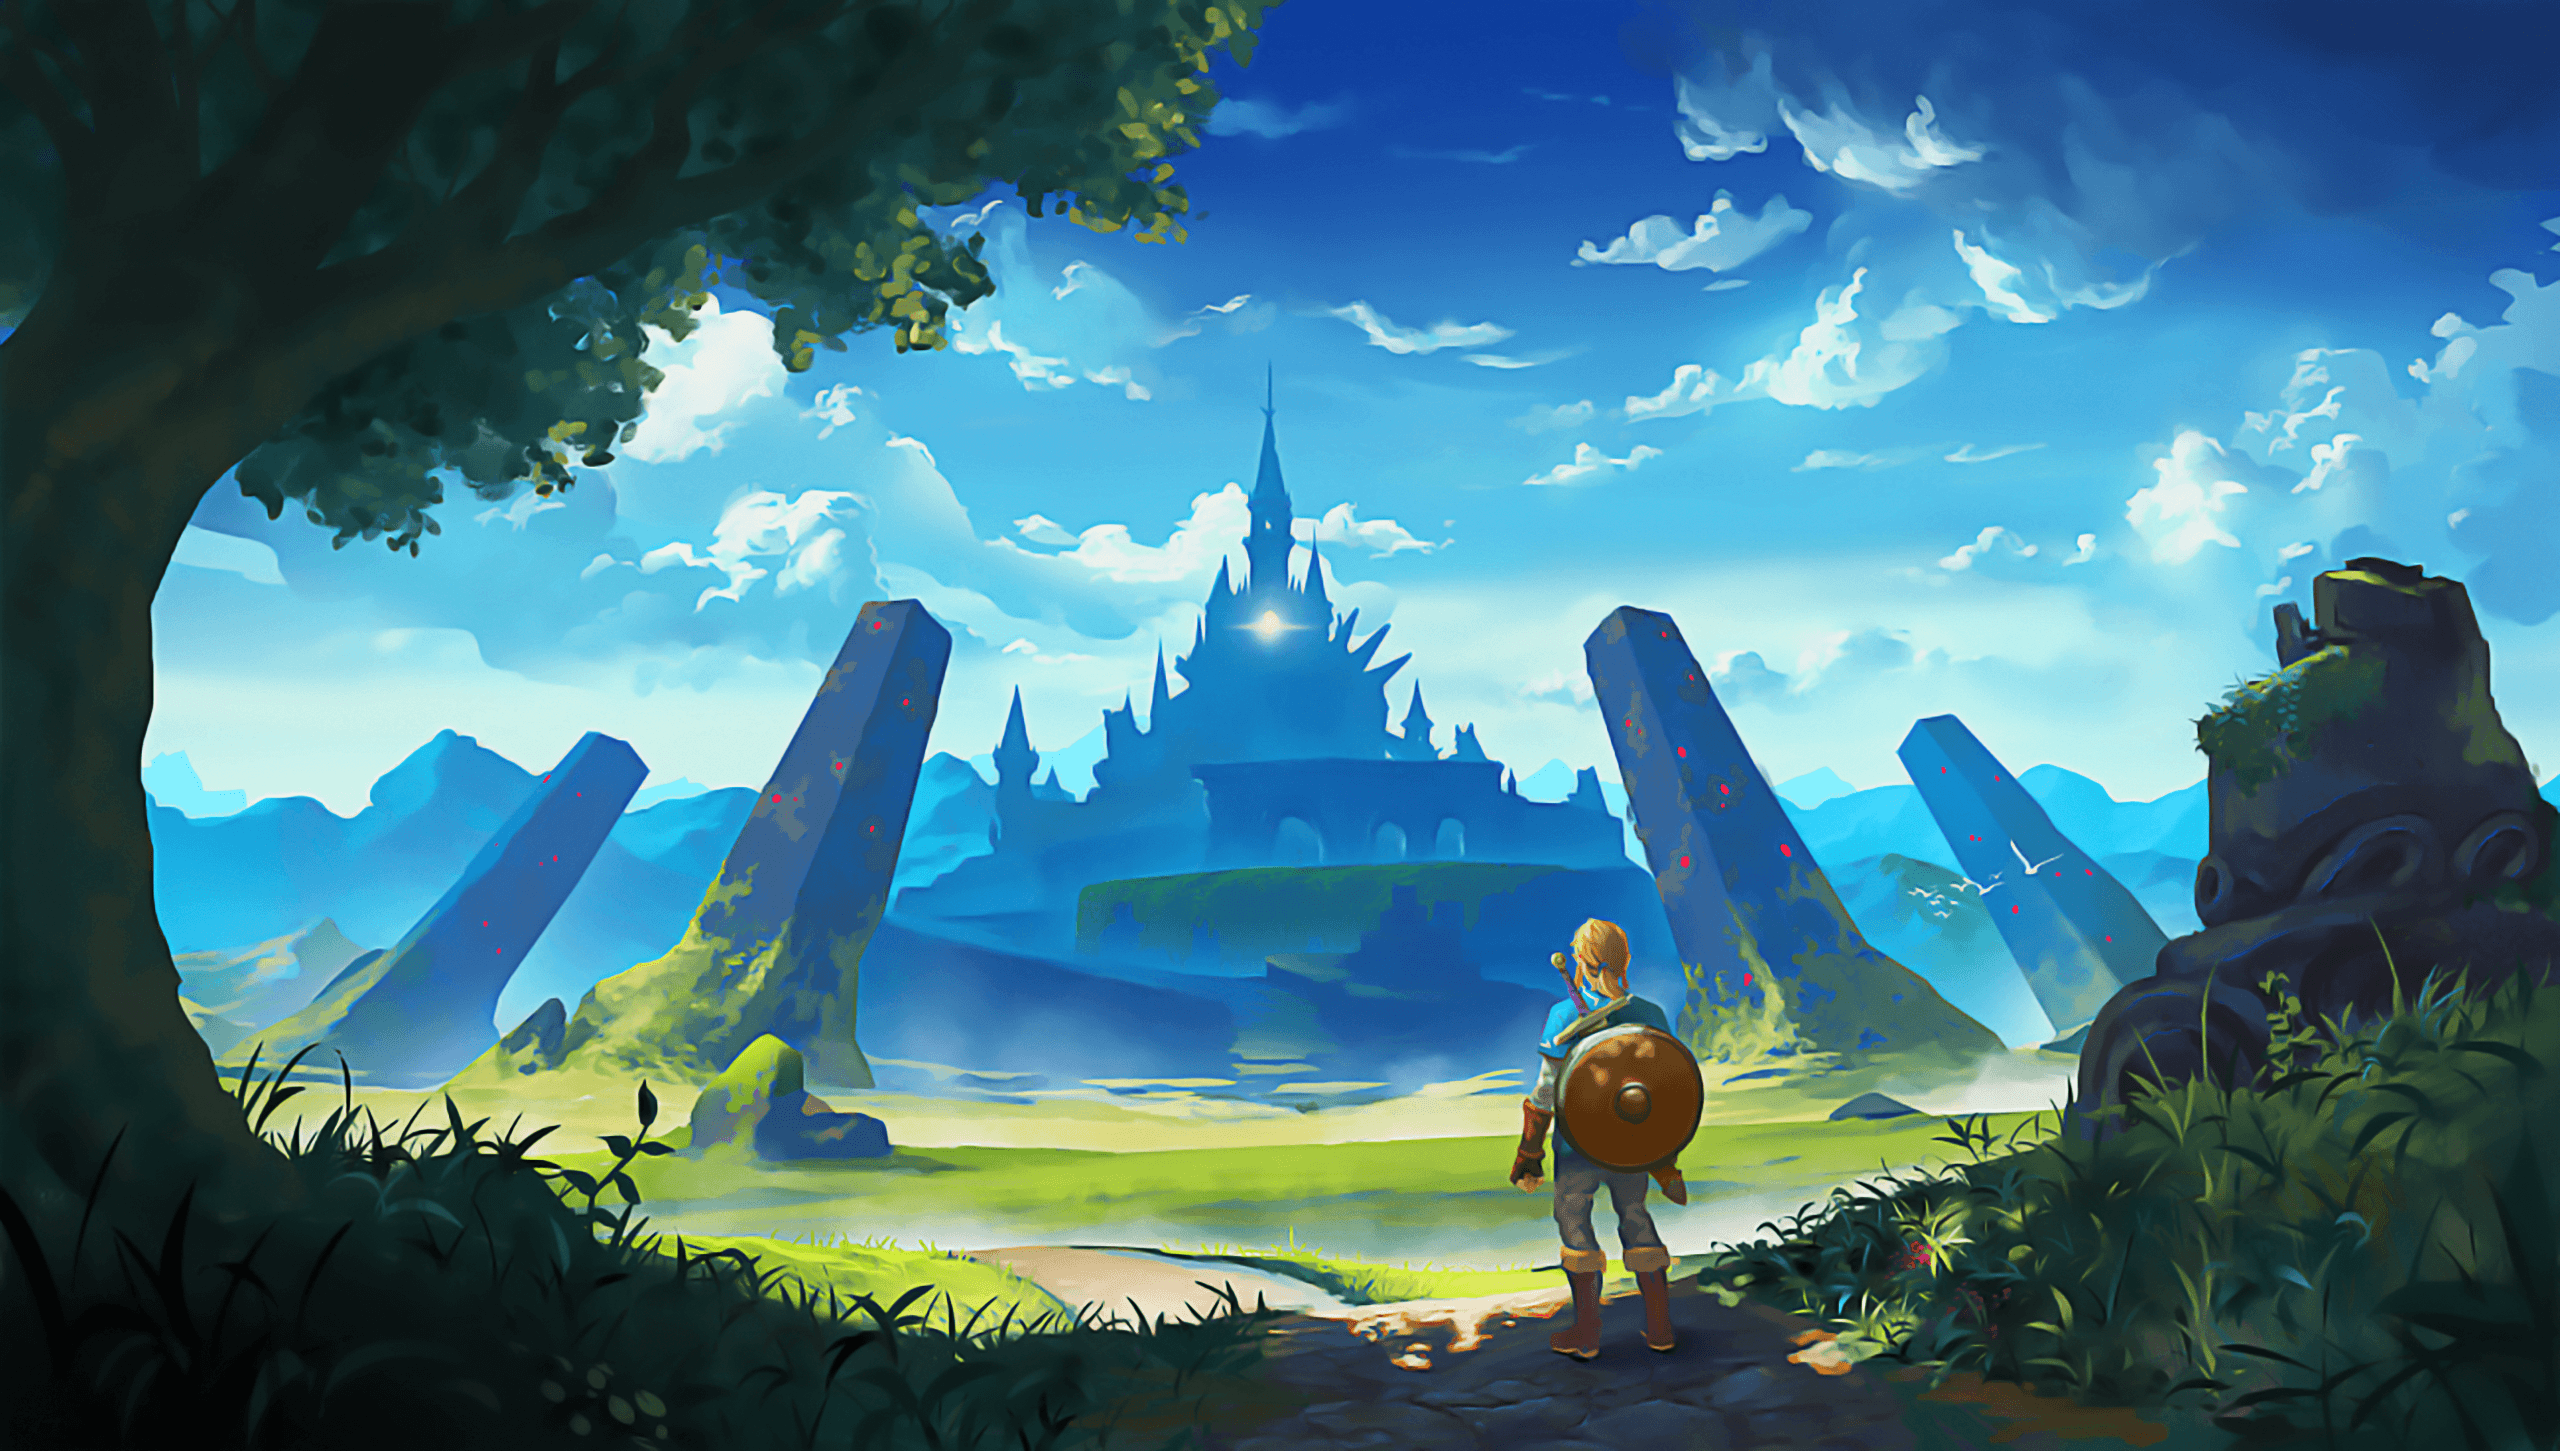 Breath Of The Wild Hd Wallpapers Top Free Breath Of The Wild Hd Backgrounds Wallpaperaccess